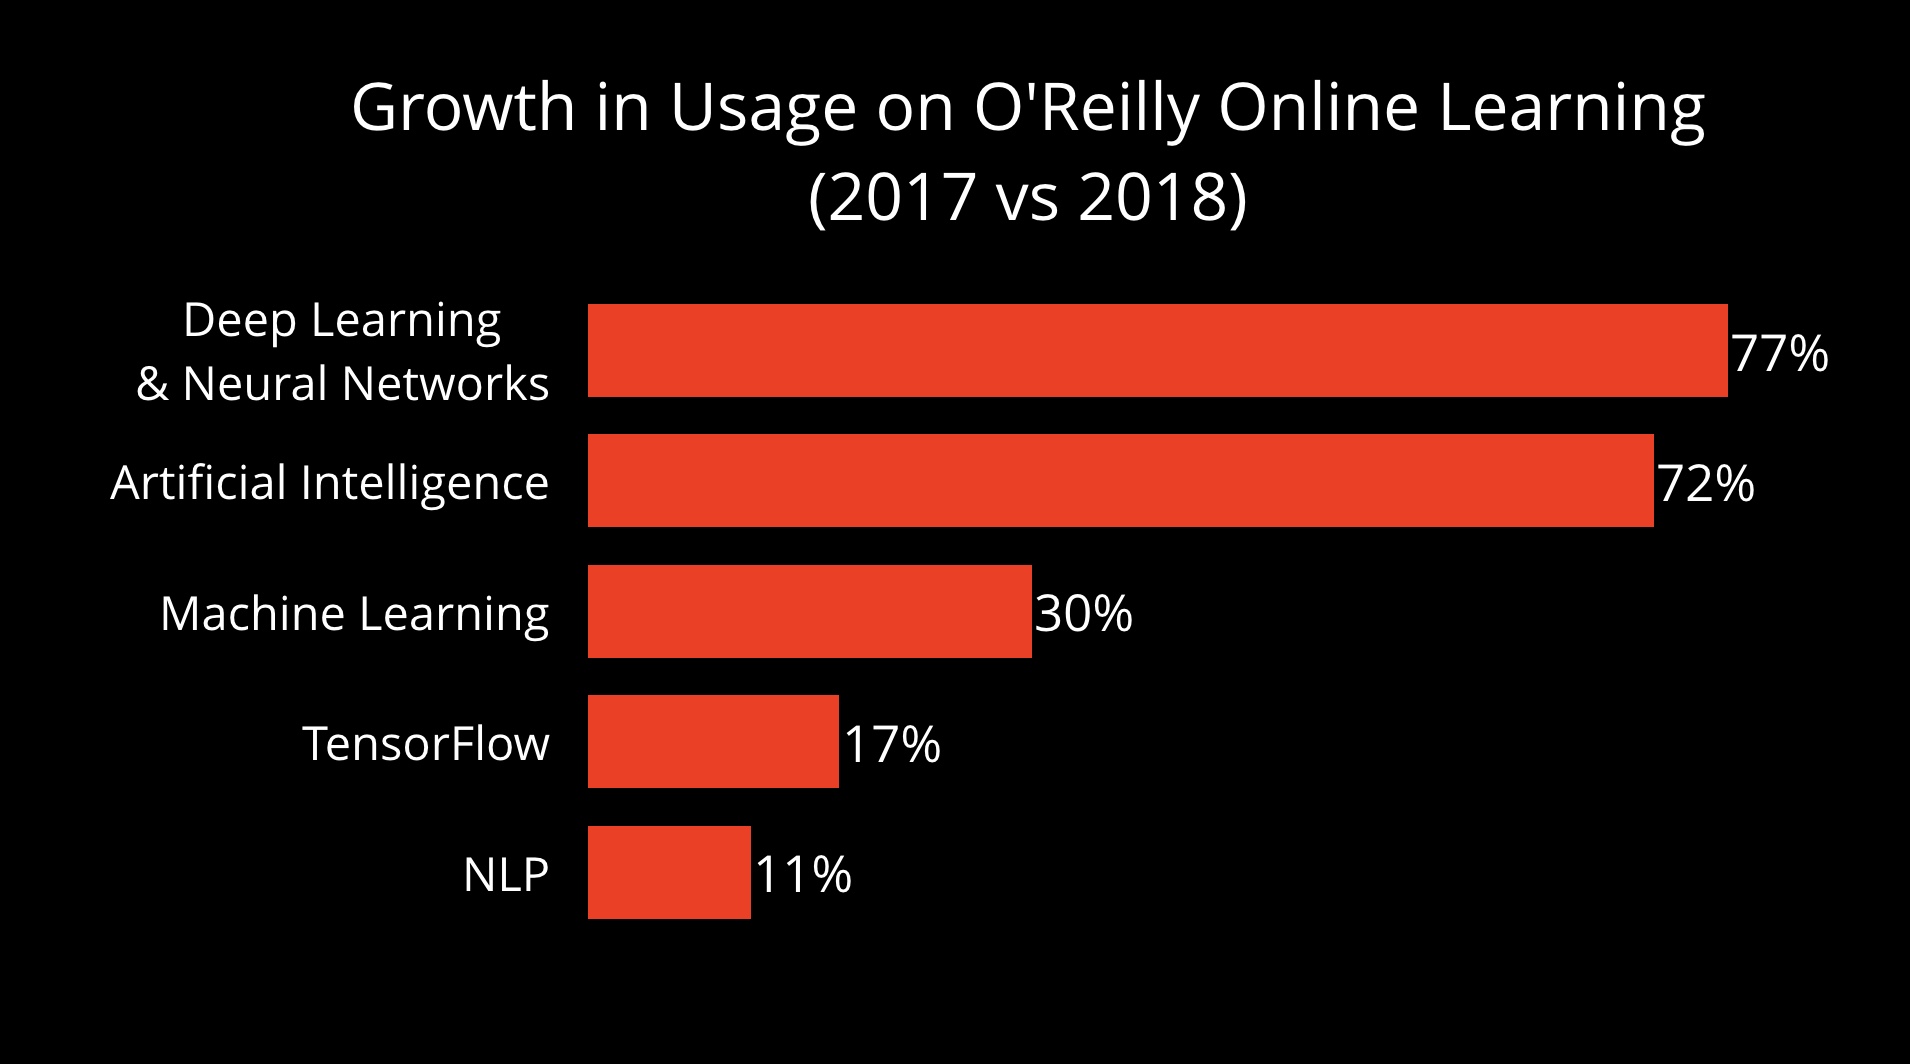 O'Reilly online learning platform deep learning content